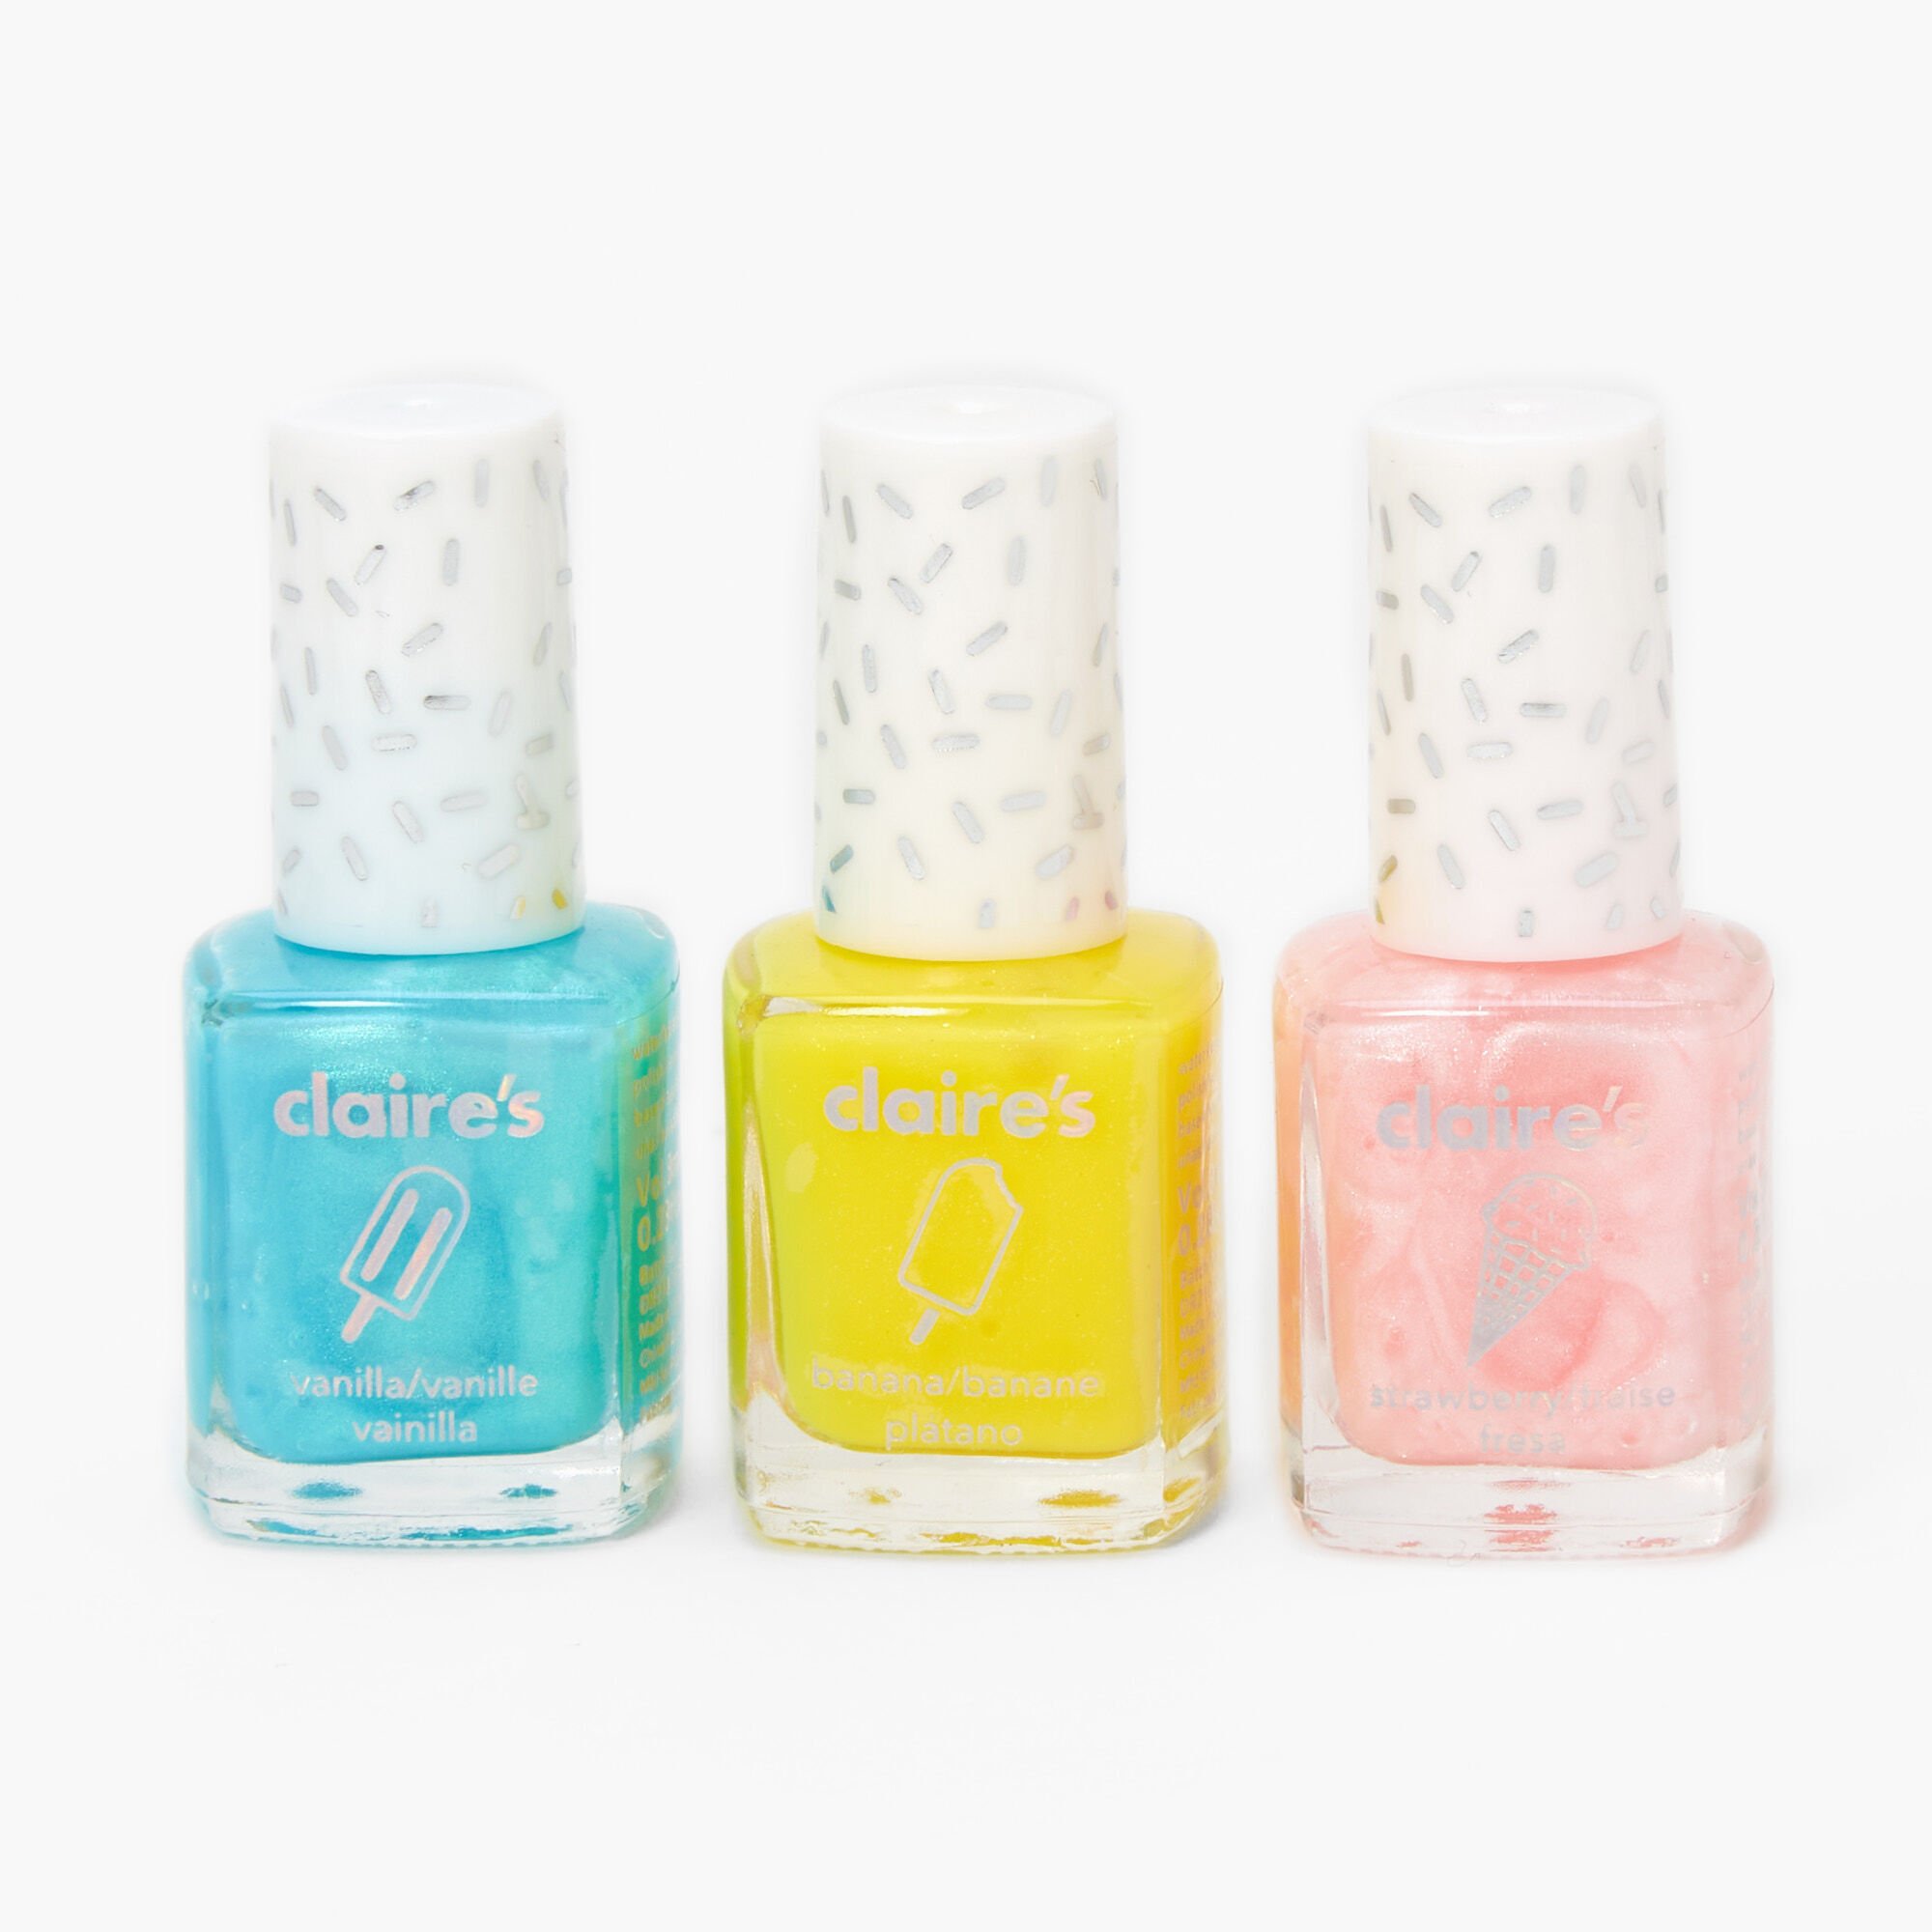 View Claires Sweets Scented Nail Polish Set 3 Pack information